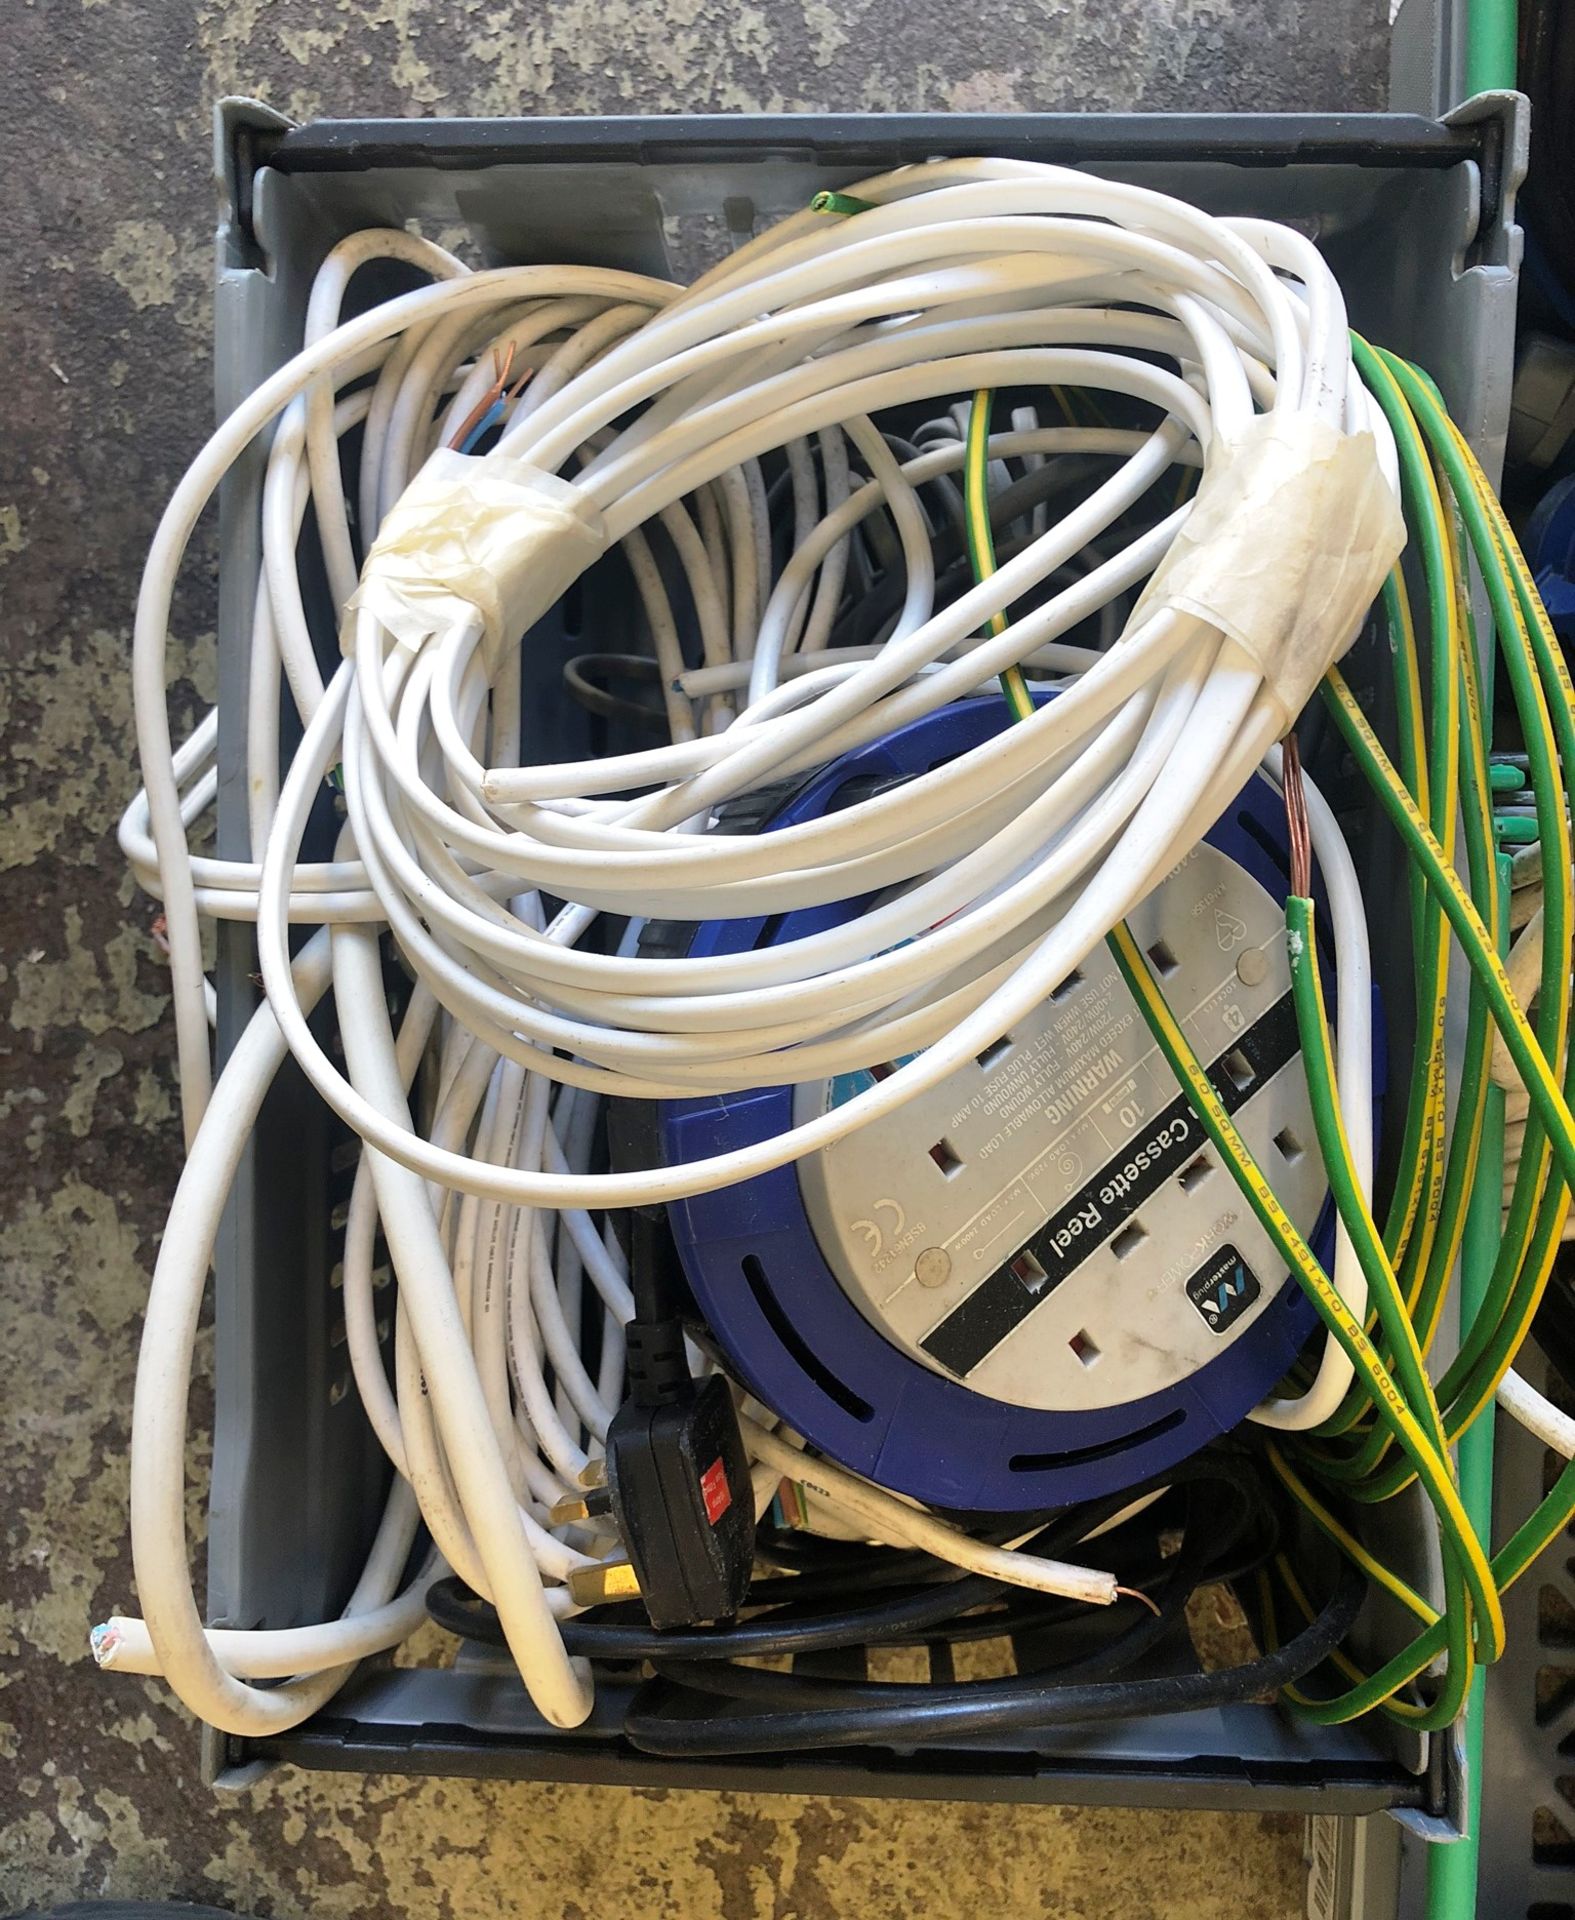 Mixed Lot of Extension Leads & Plugs - As Pictured - Image 4 of 6